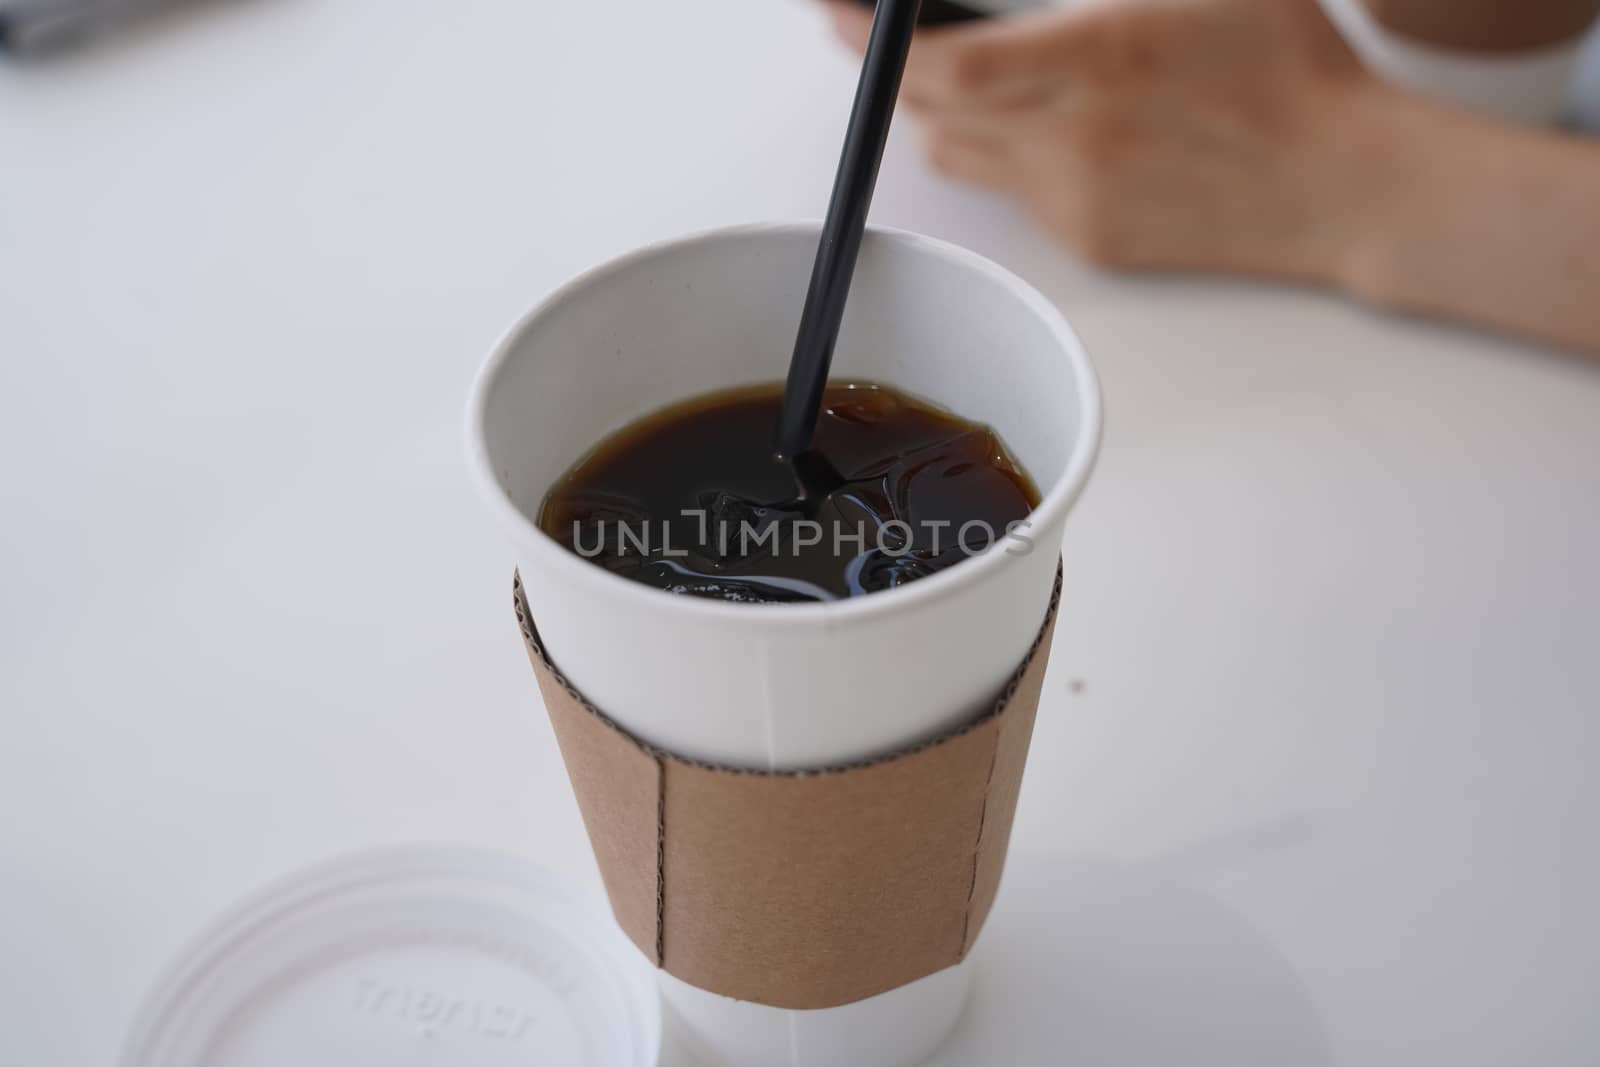 Pouring coffee into cup by uphotopia